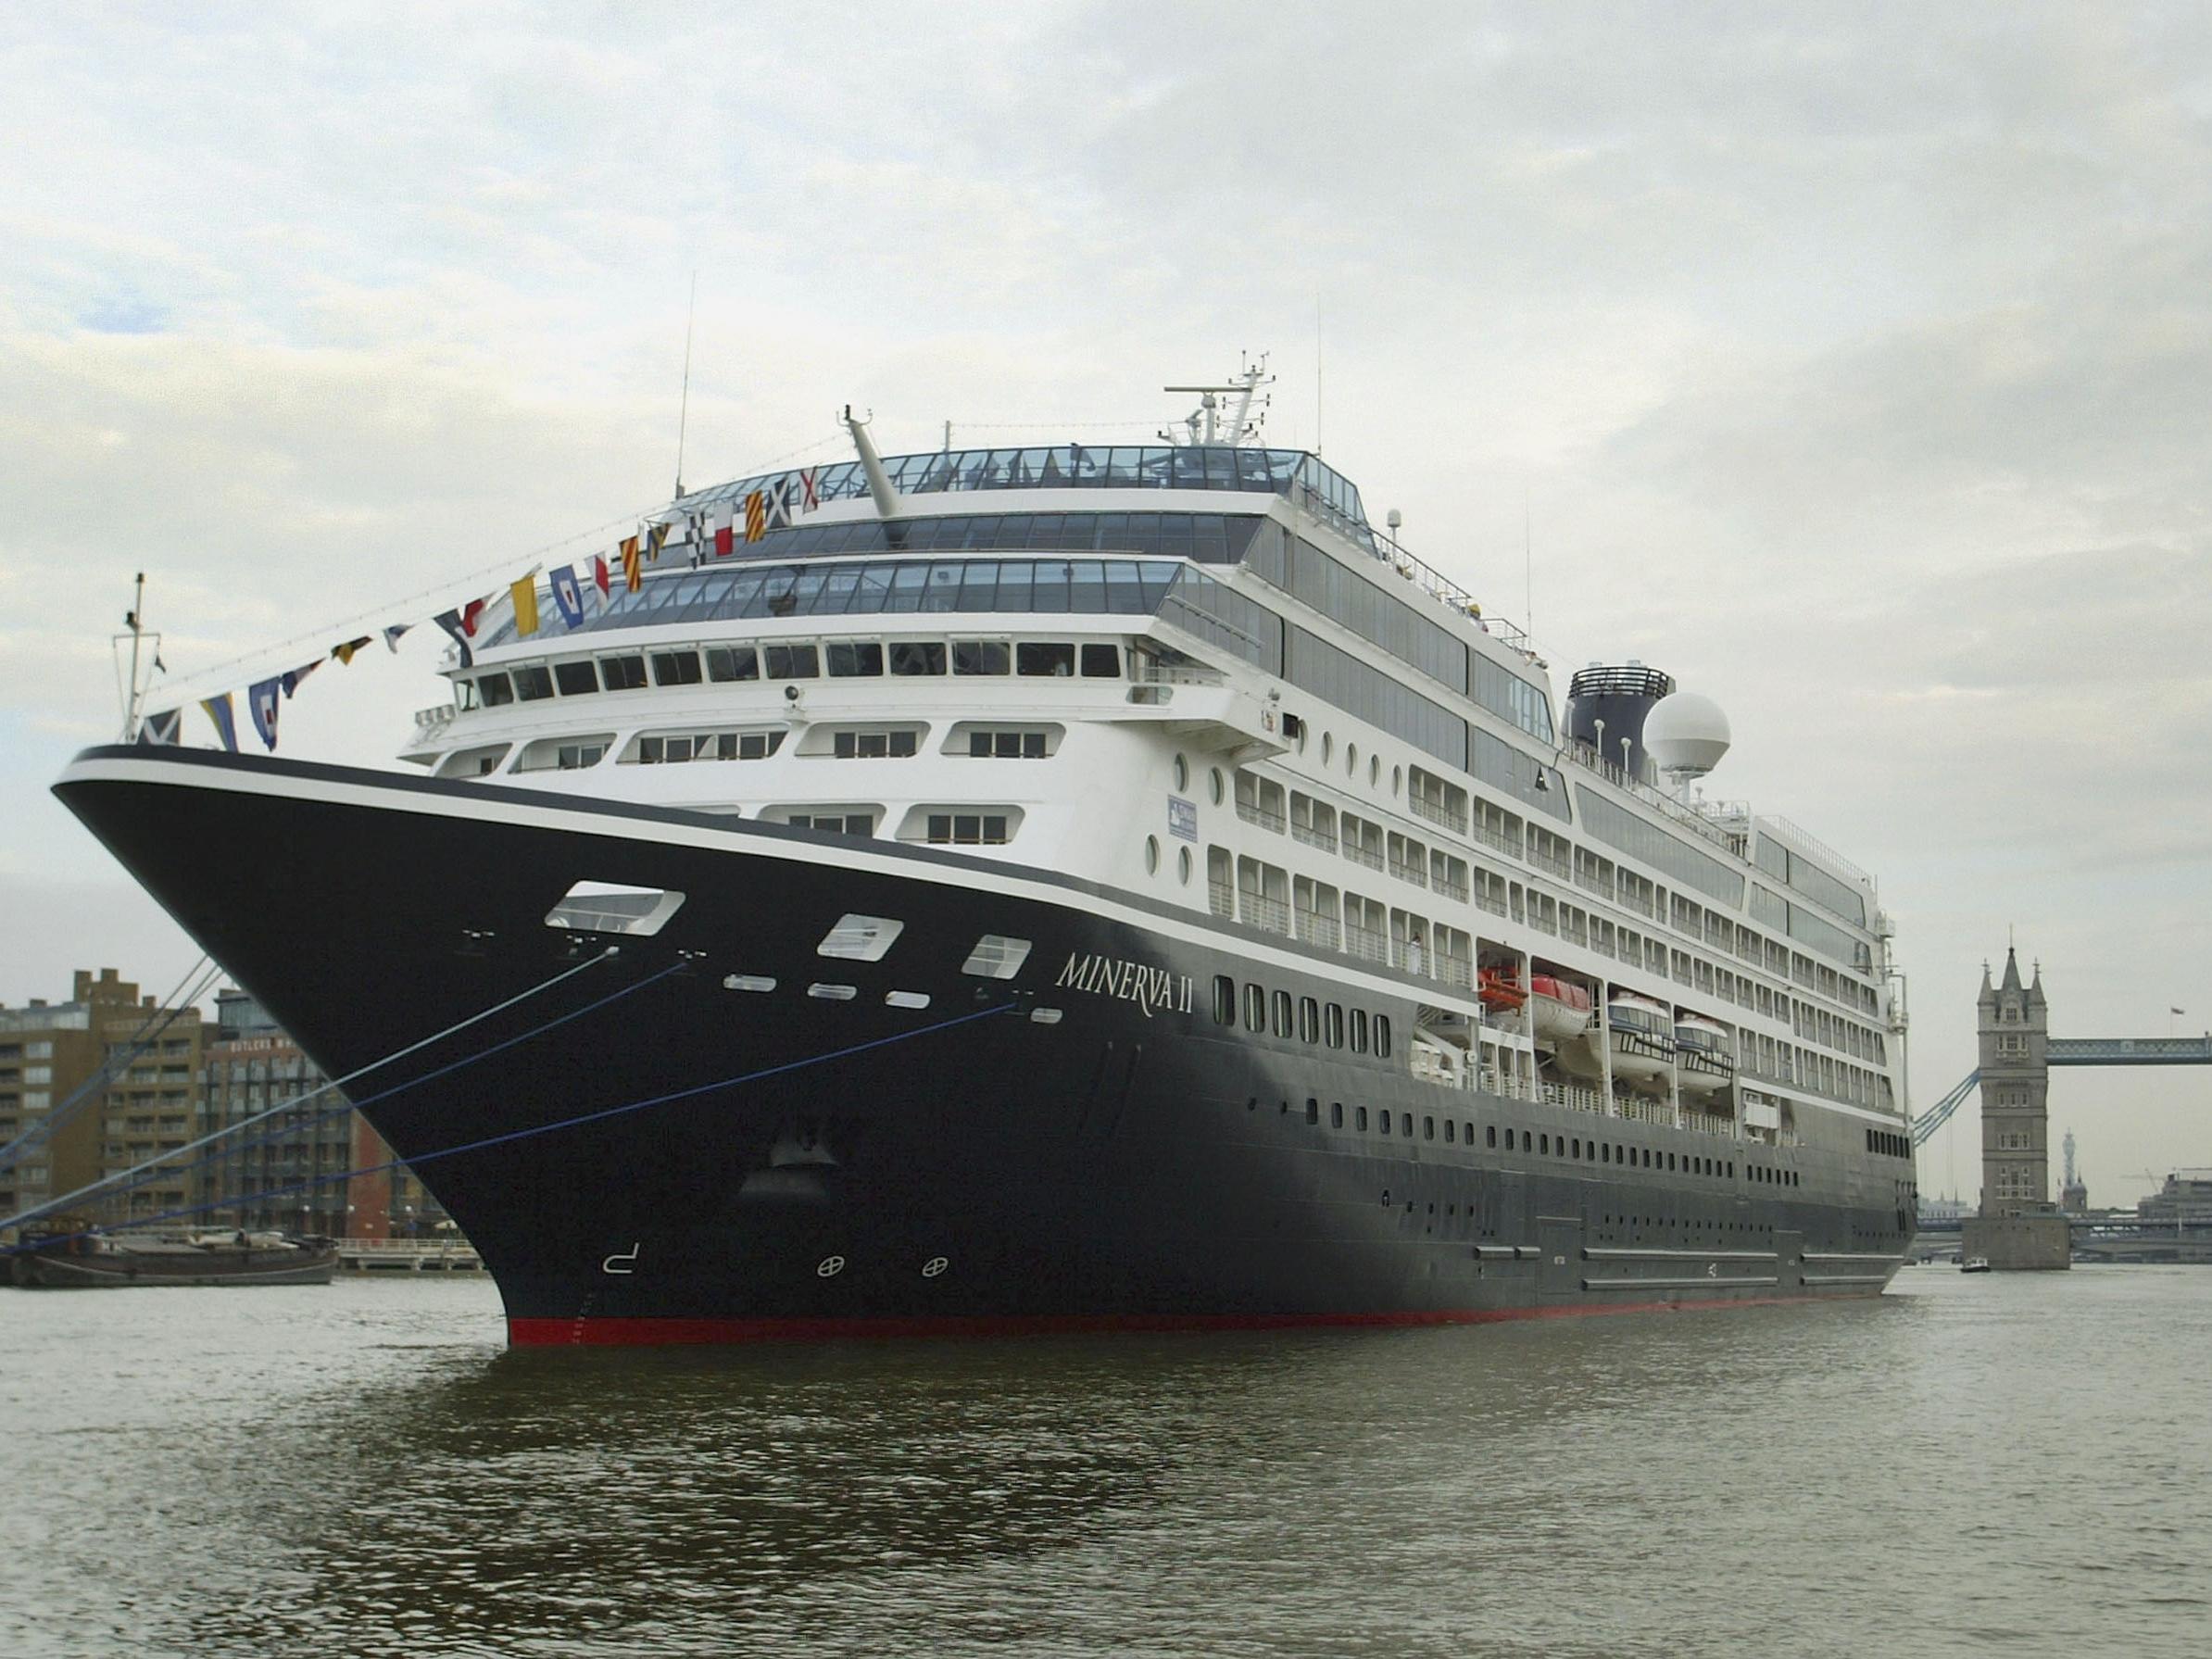 London campaign groups have opposed cruise ships docking on the Thames due to their high levels of pollution